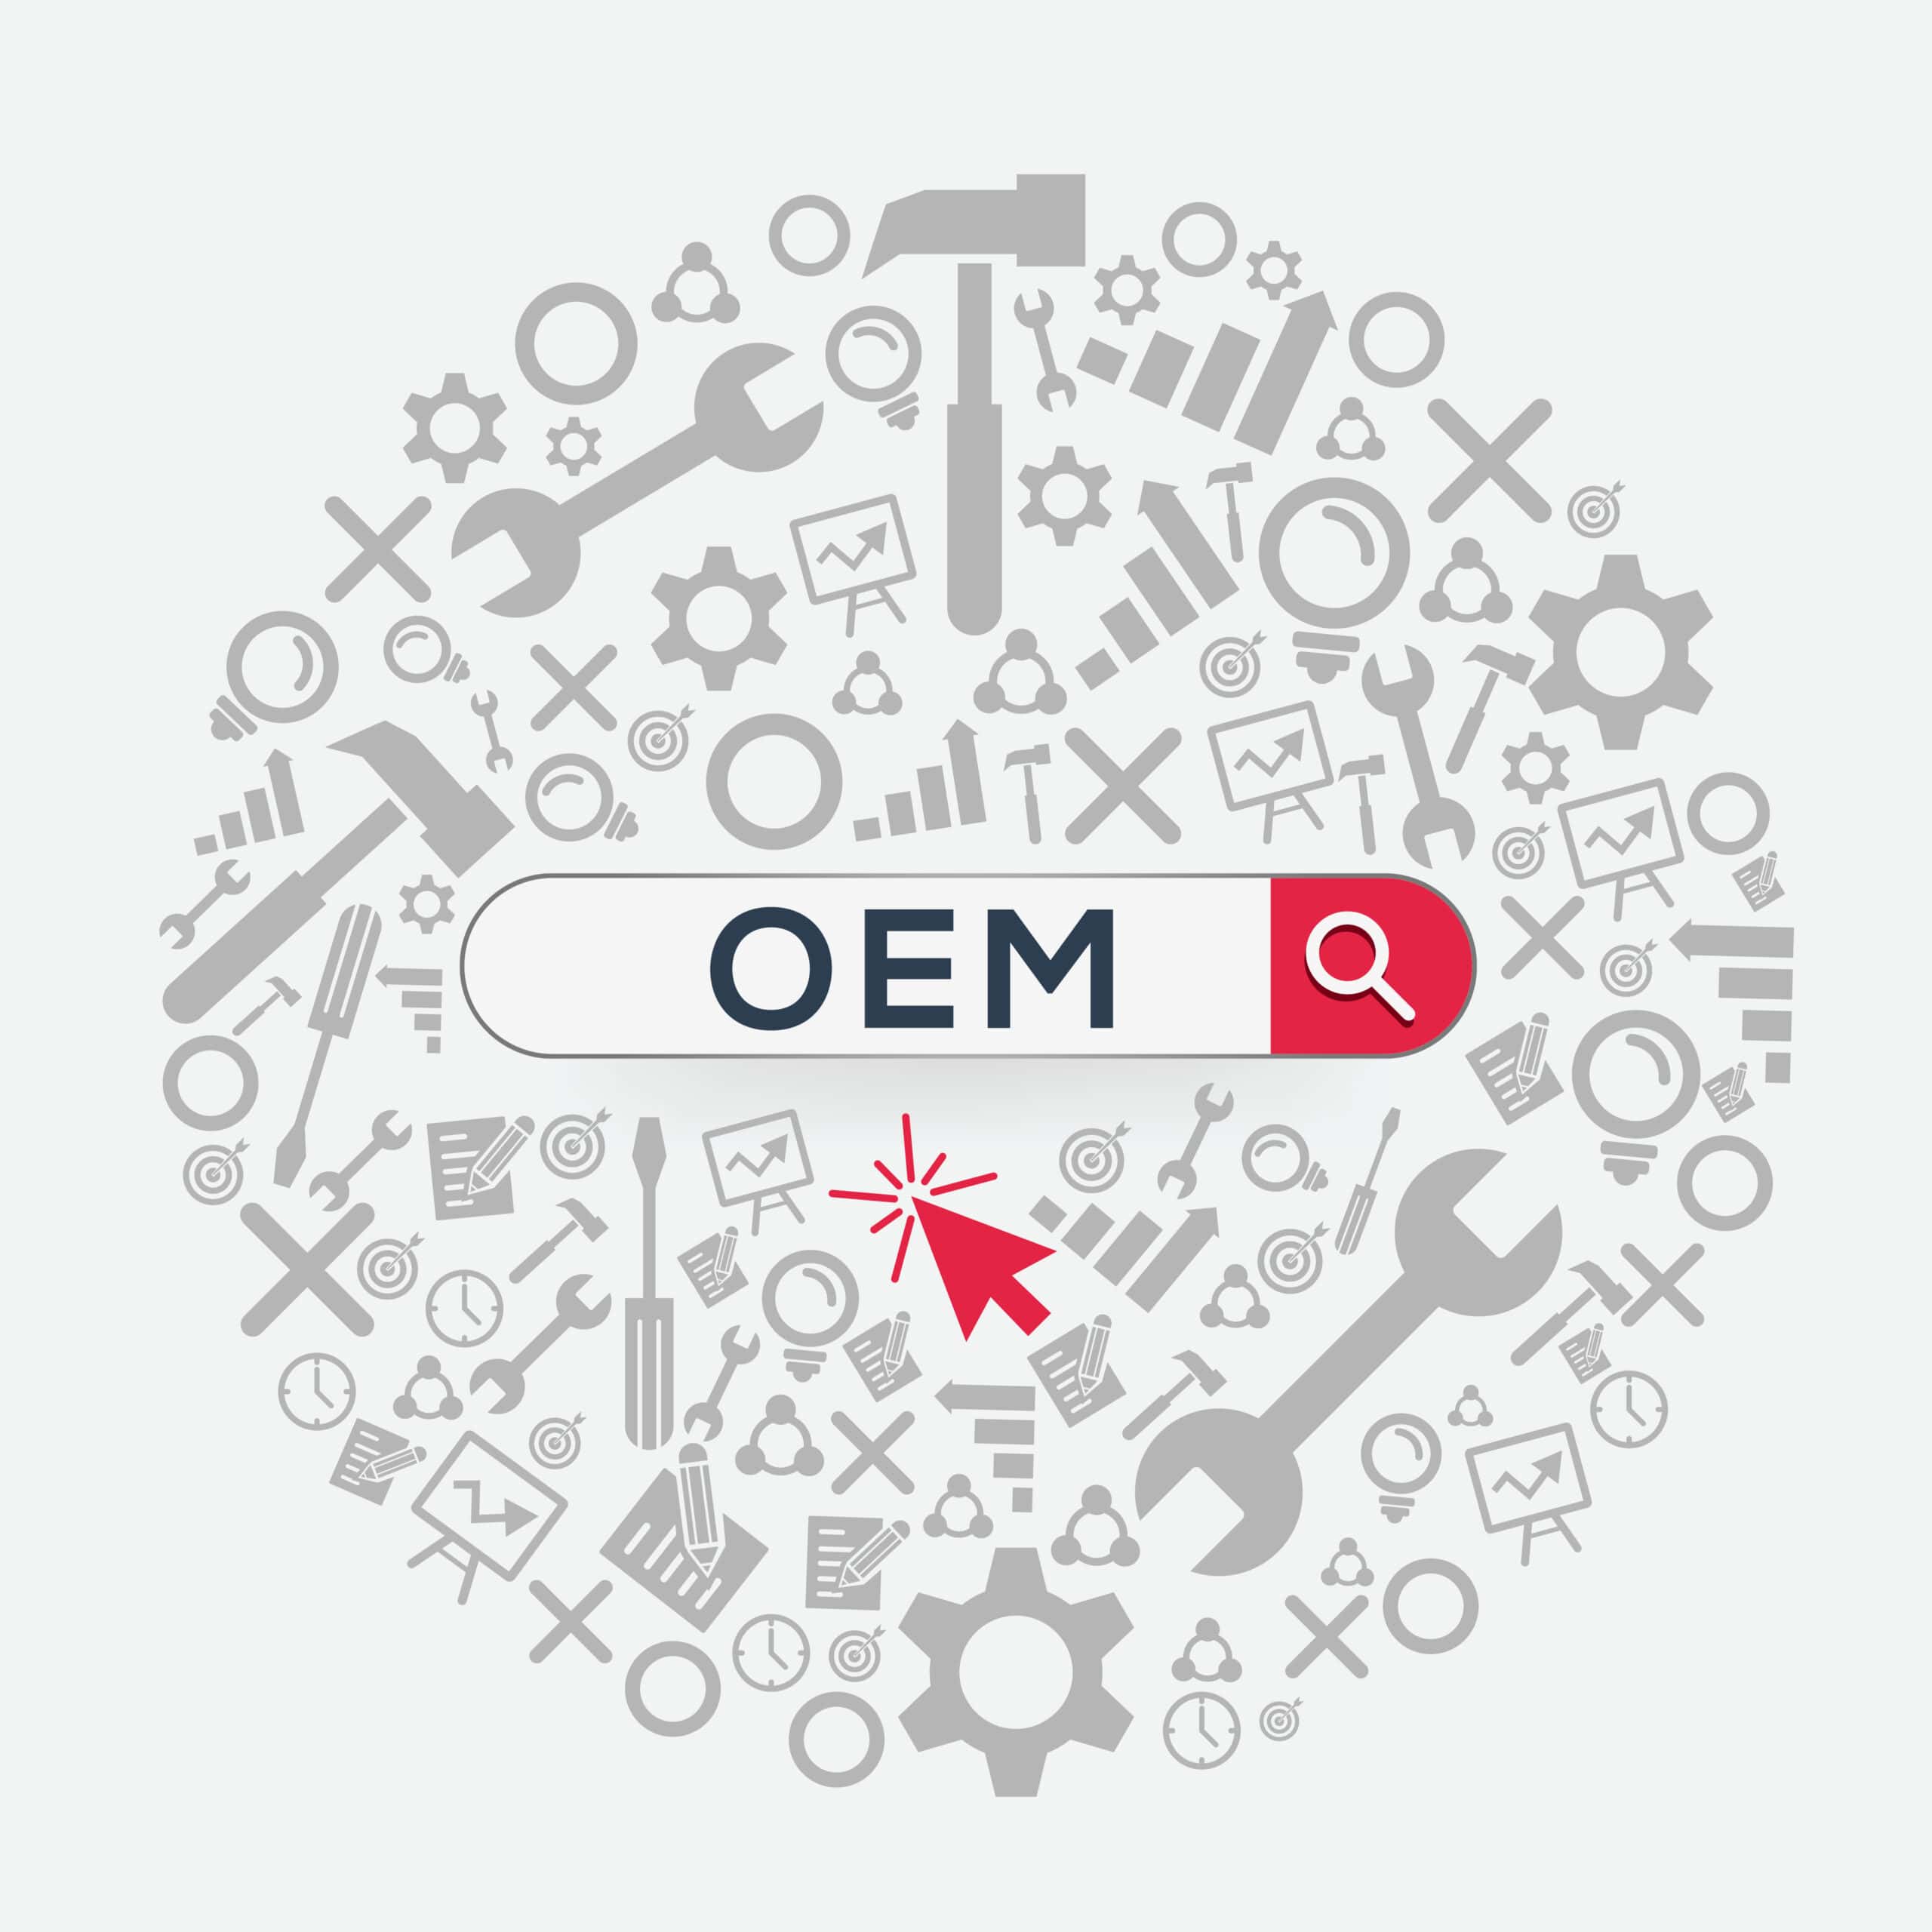 Original Equipment Manufacturer (OEM): Definition and Examples